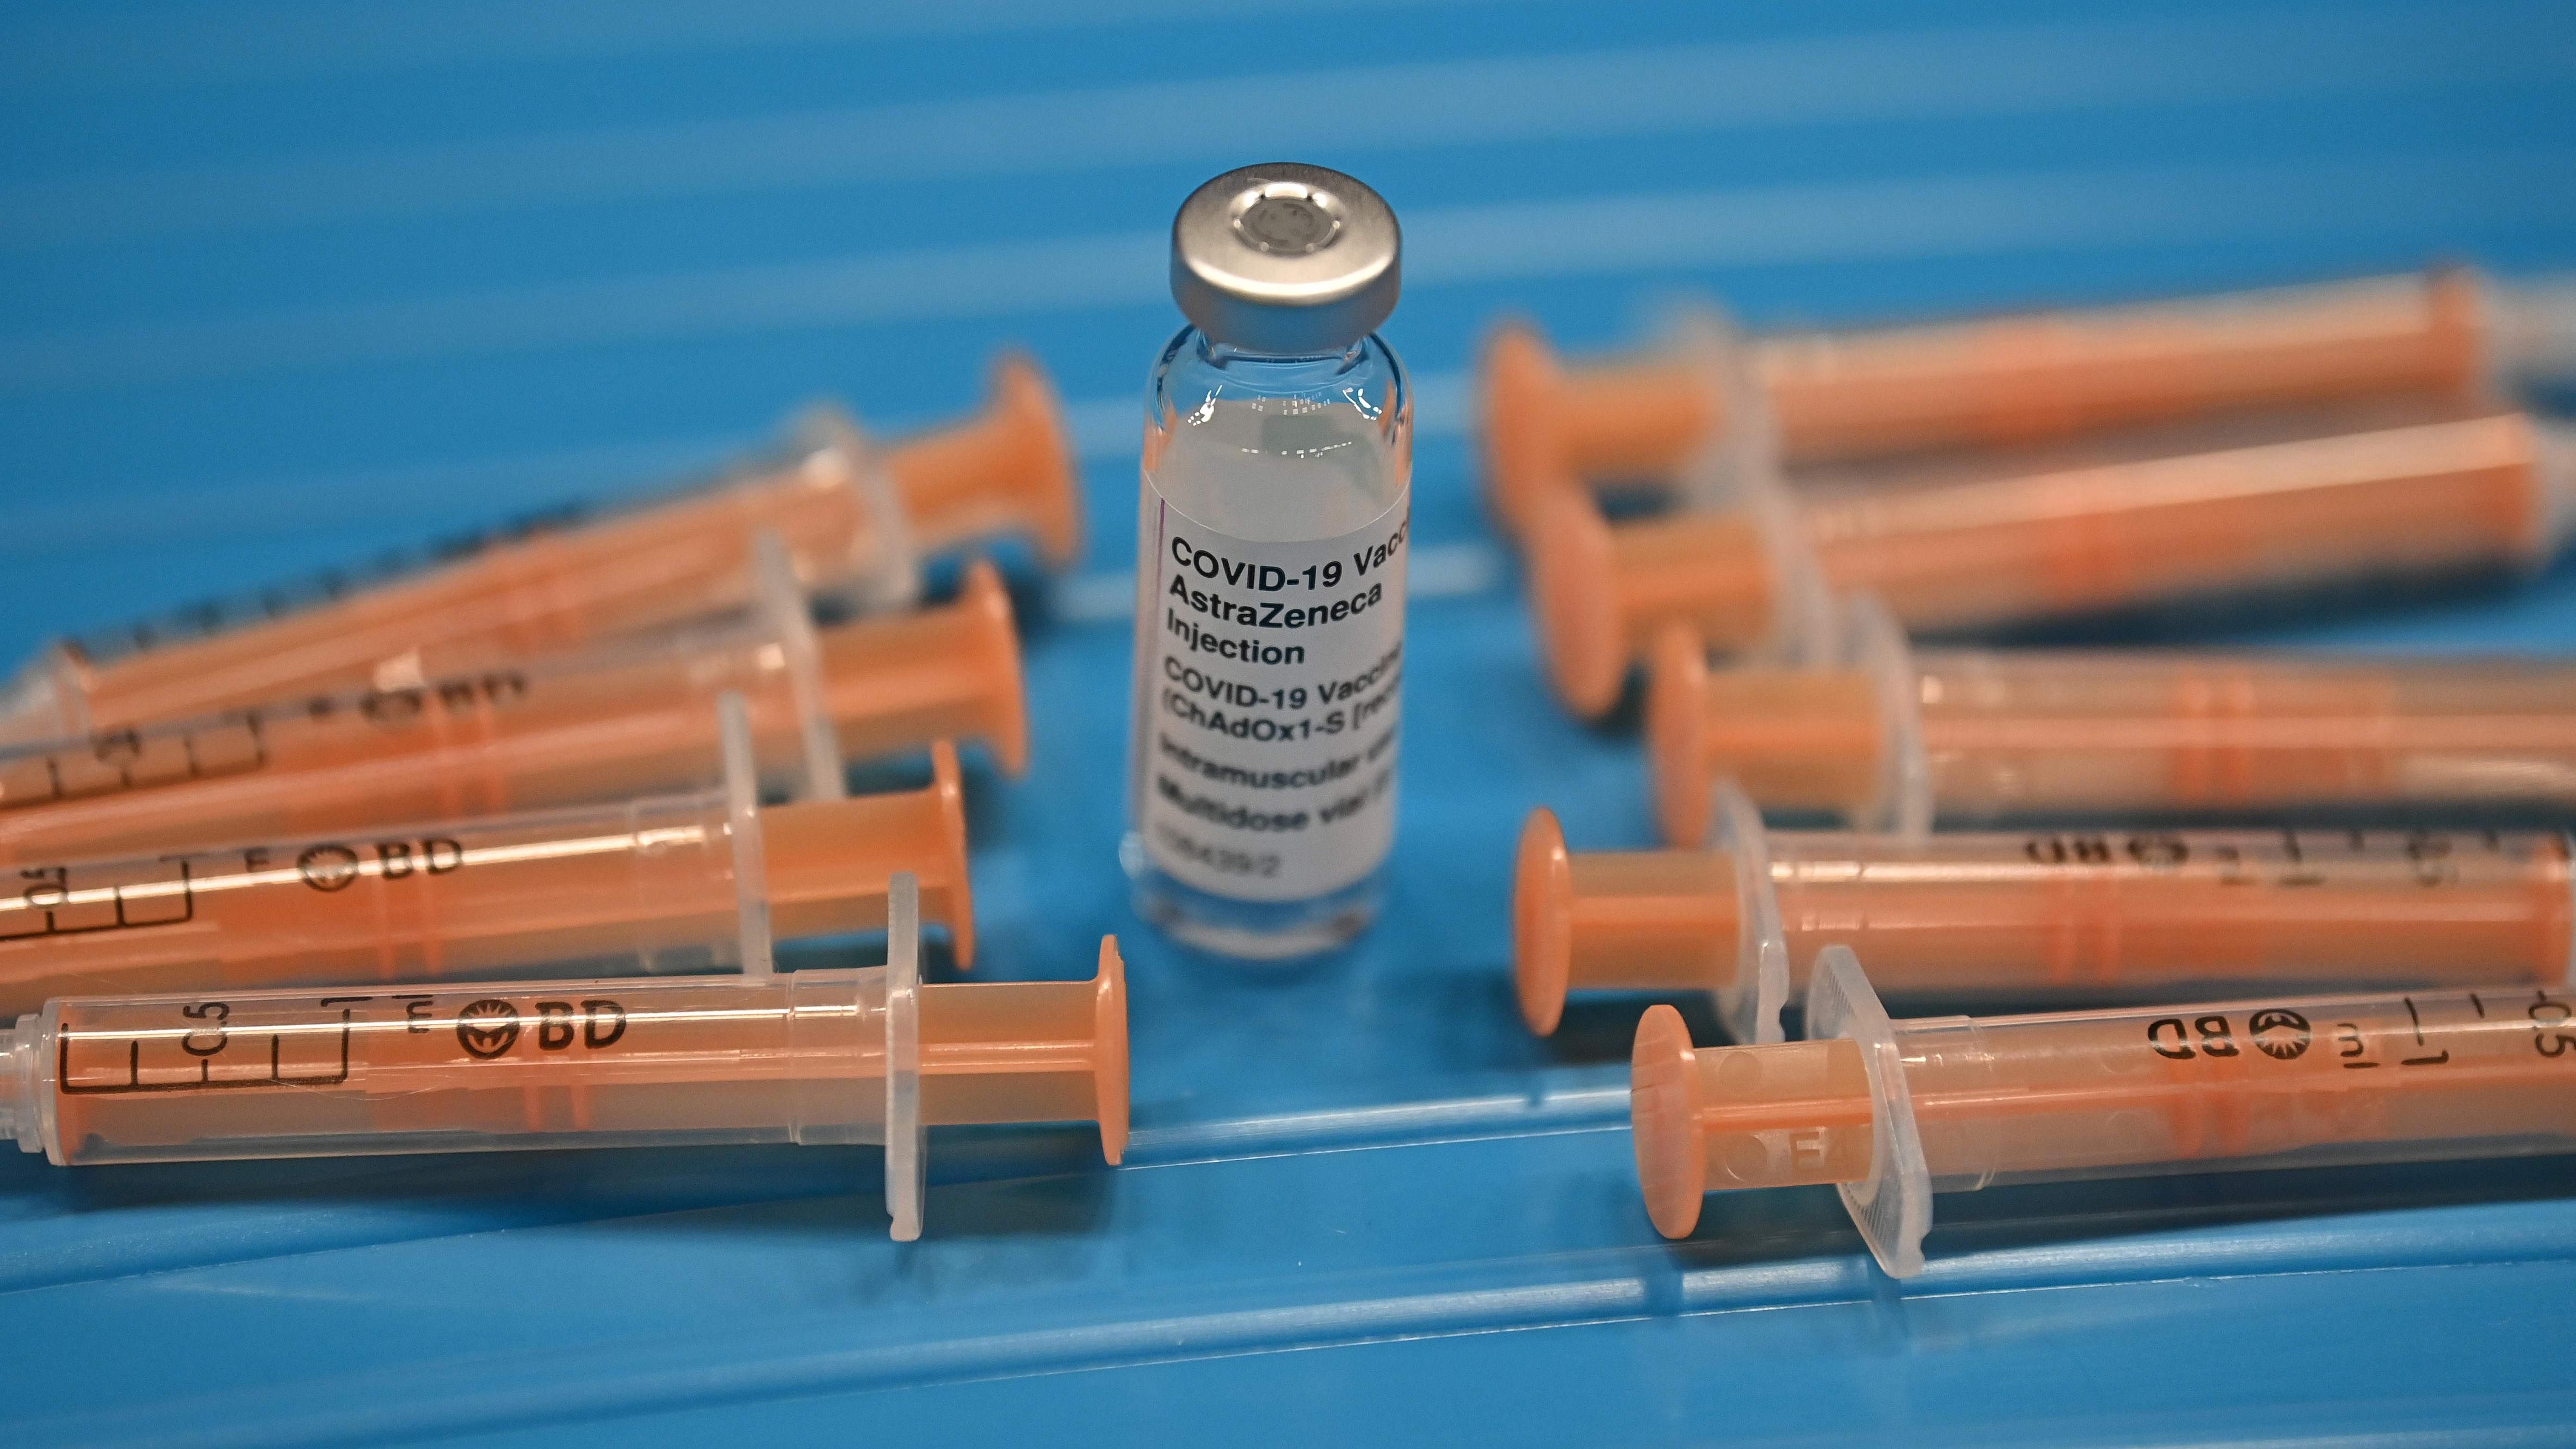 A posed photograph taken as an illustration shows syringes arranged around a used vial of the Oxford/AstraZeneca Covid-19 vaccine at the vaccination centre. Credit: AFP